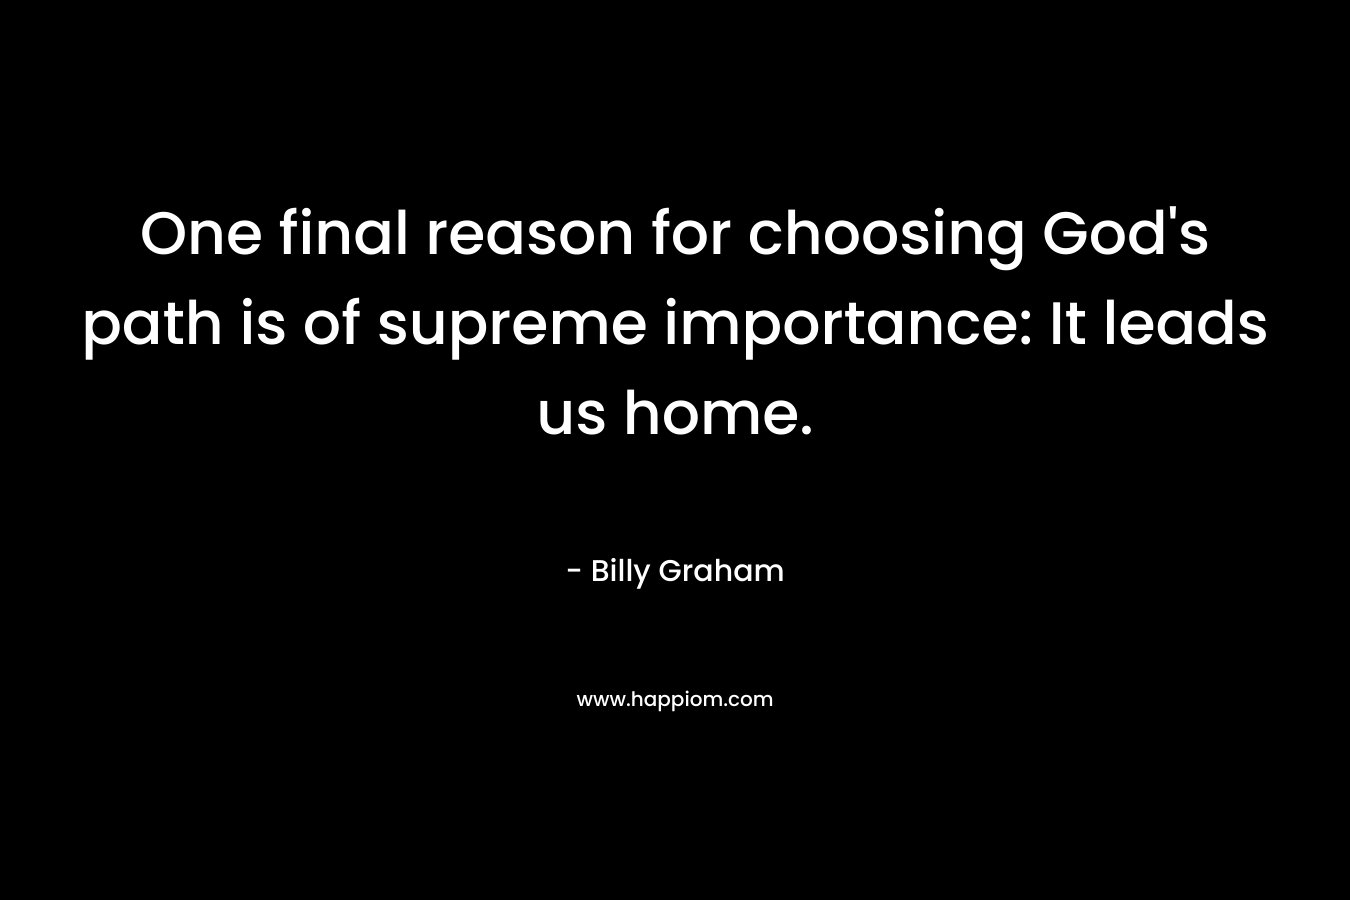 One final reason for choosing God's path is of supreme importance: It leads us home.